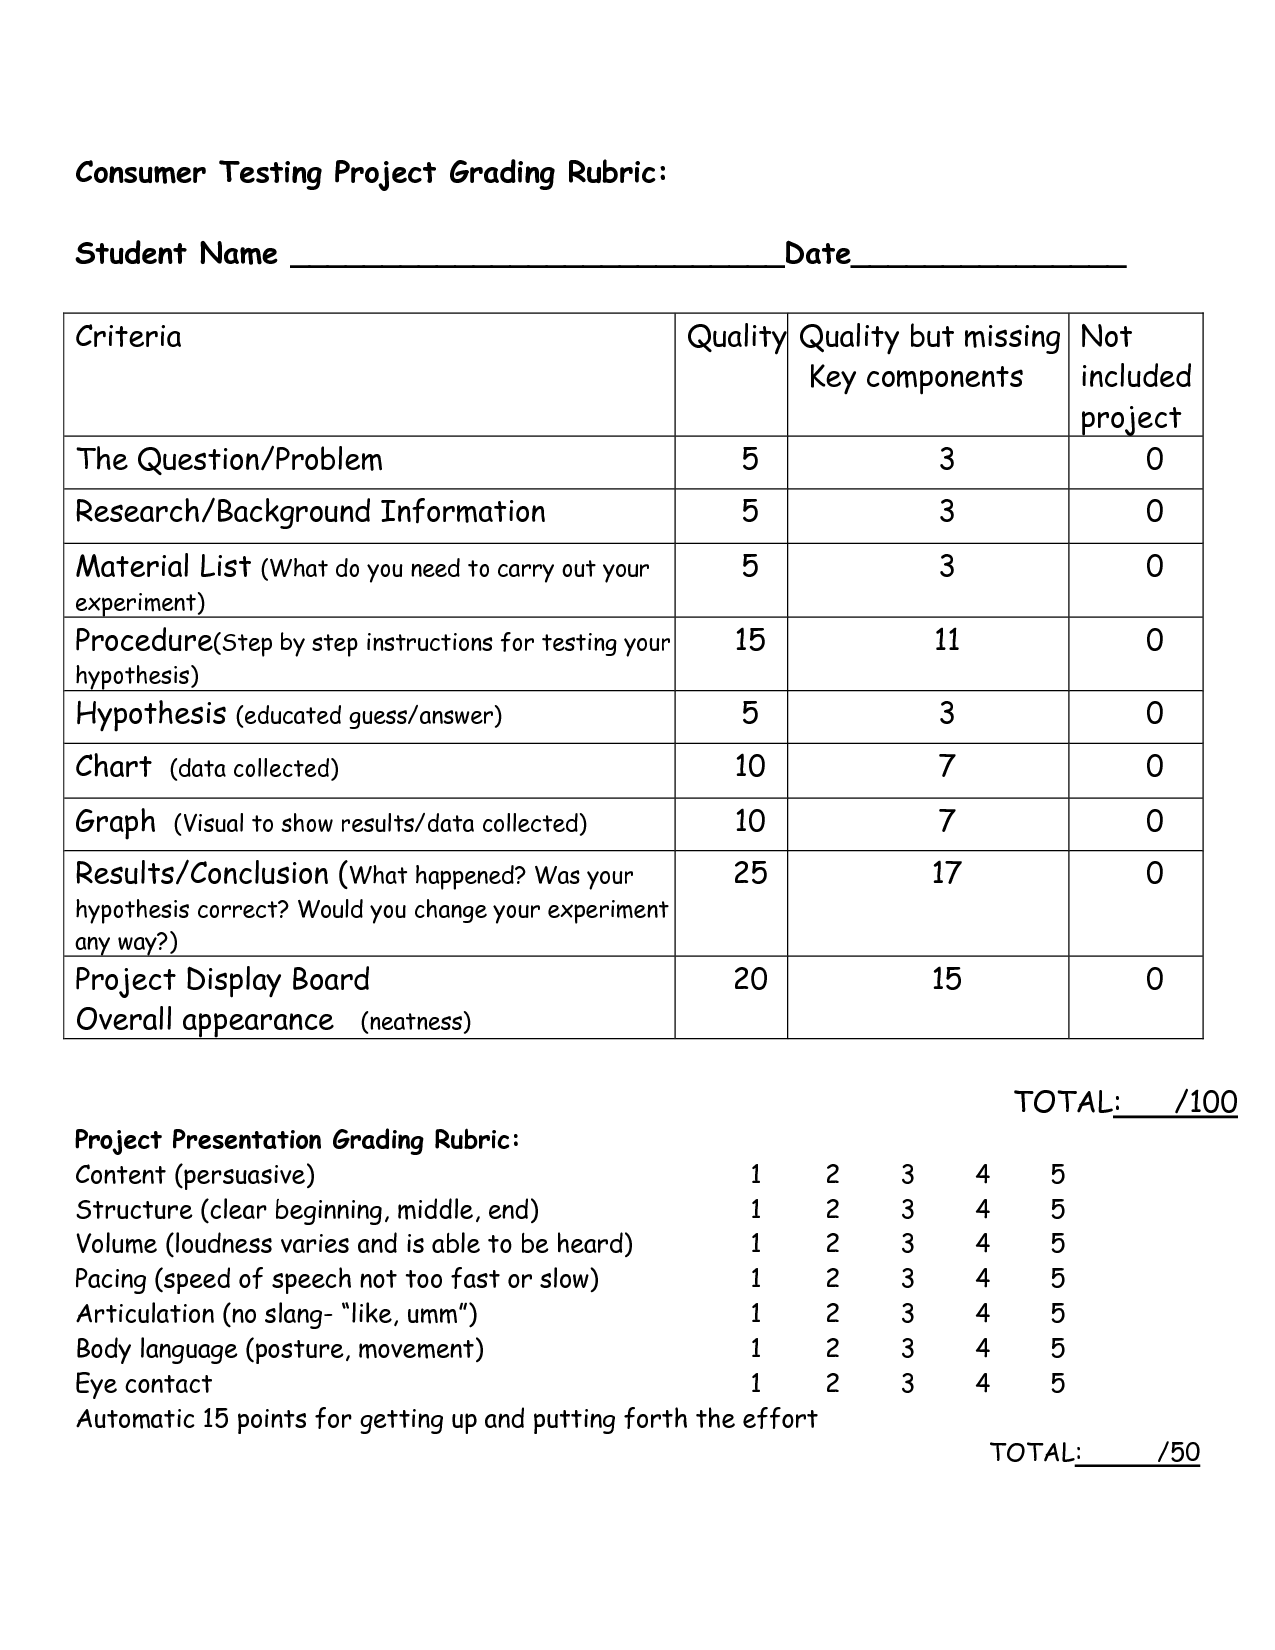 middle school research paper rubric